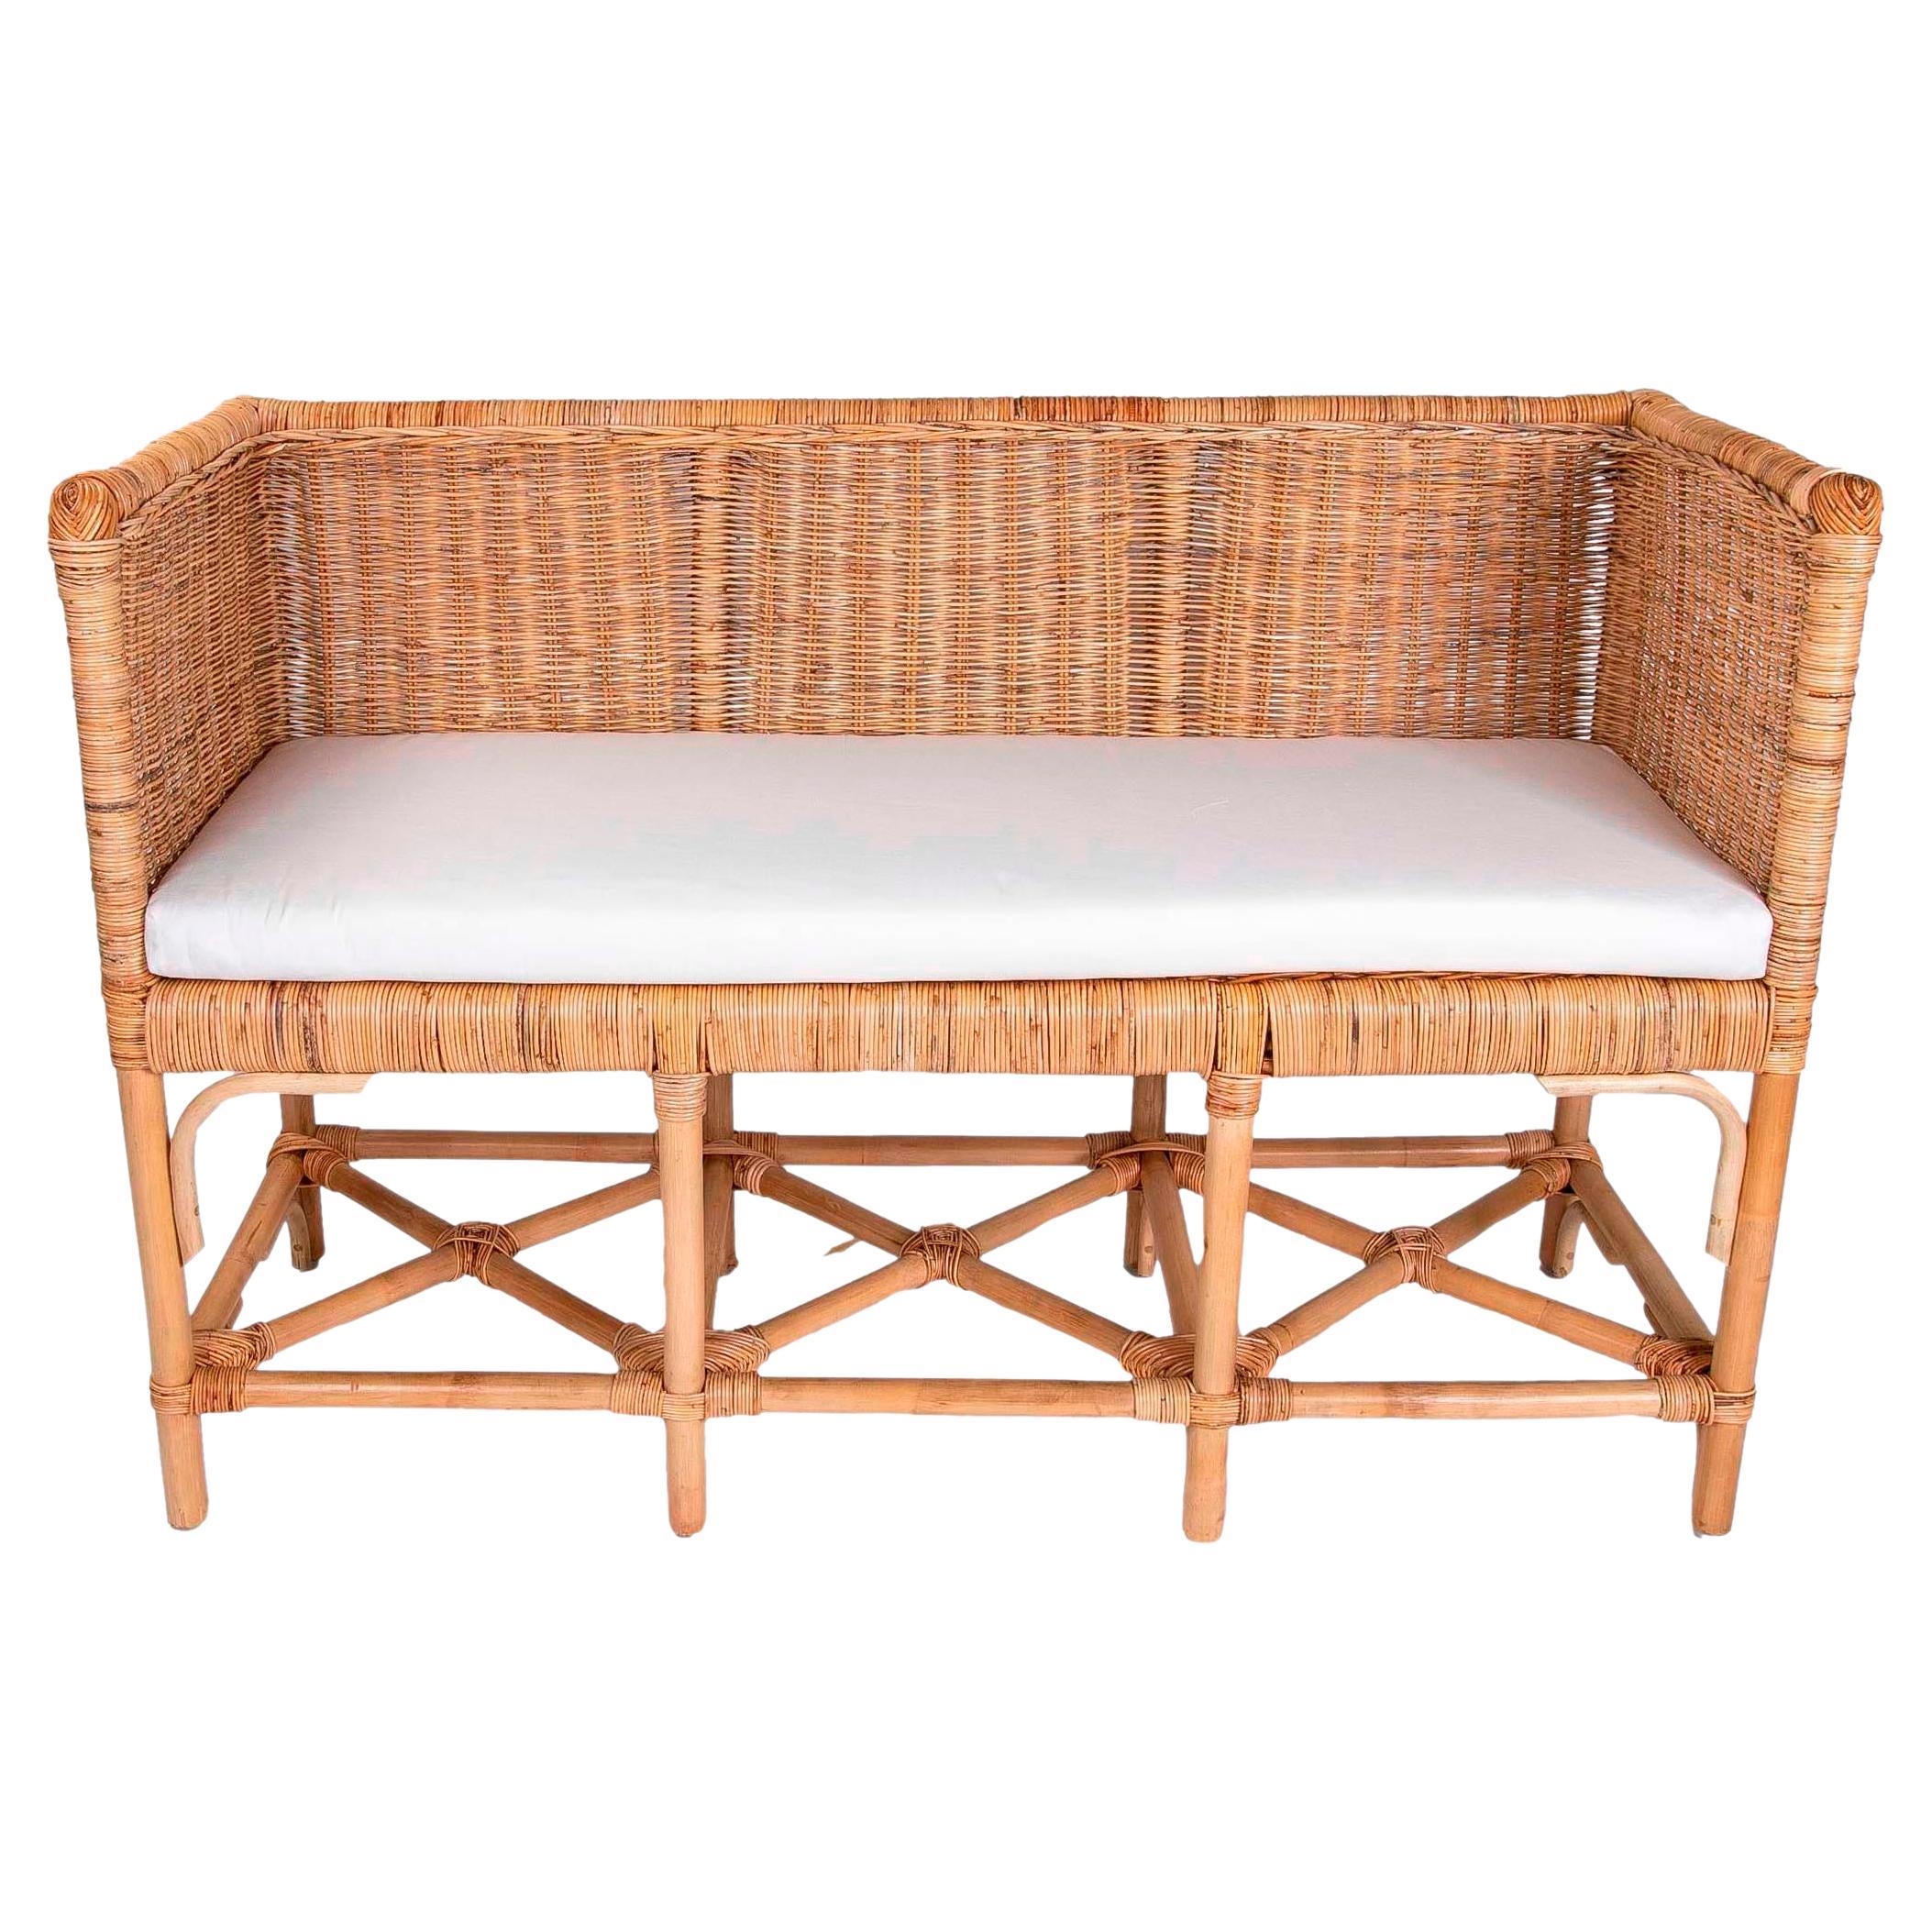 Handmade Rattan Bench with Straight Arms and Backrest For Sale